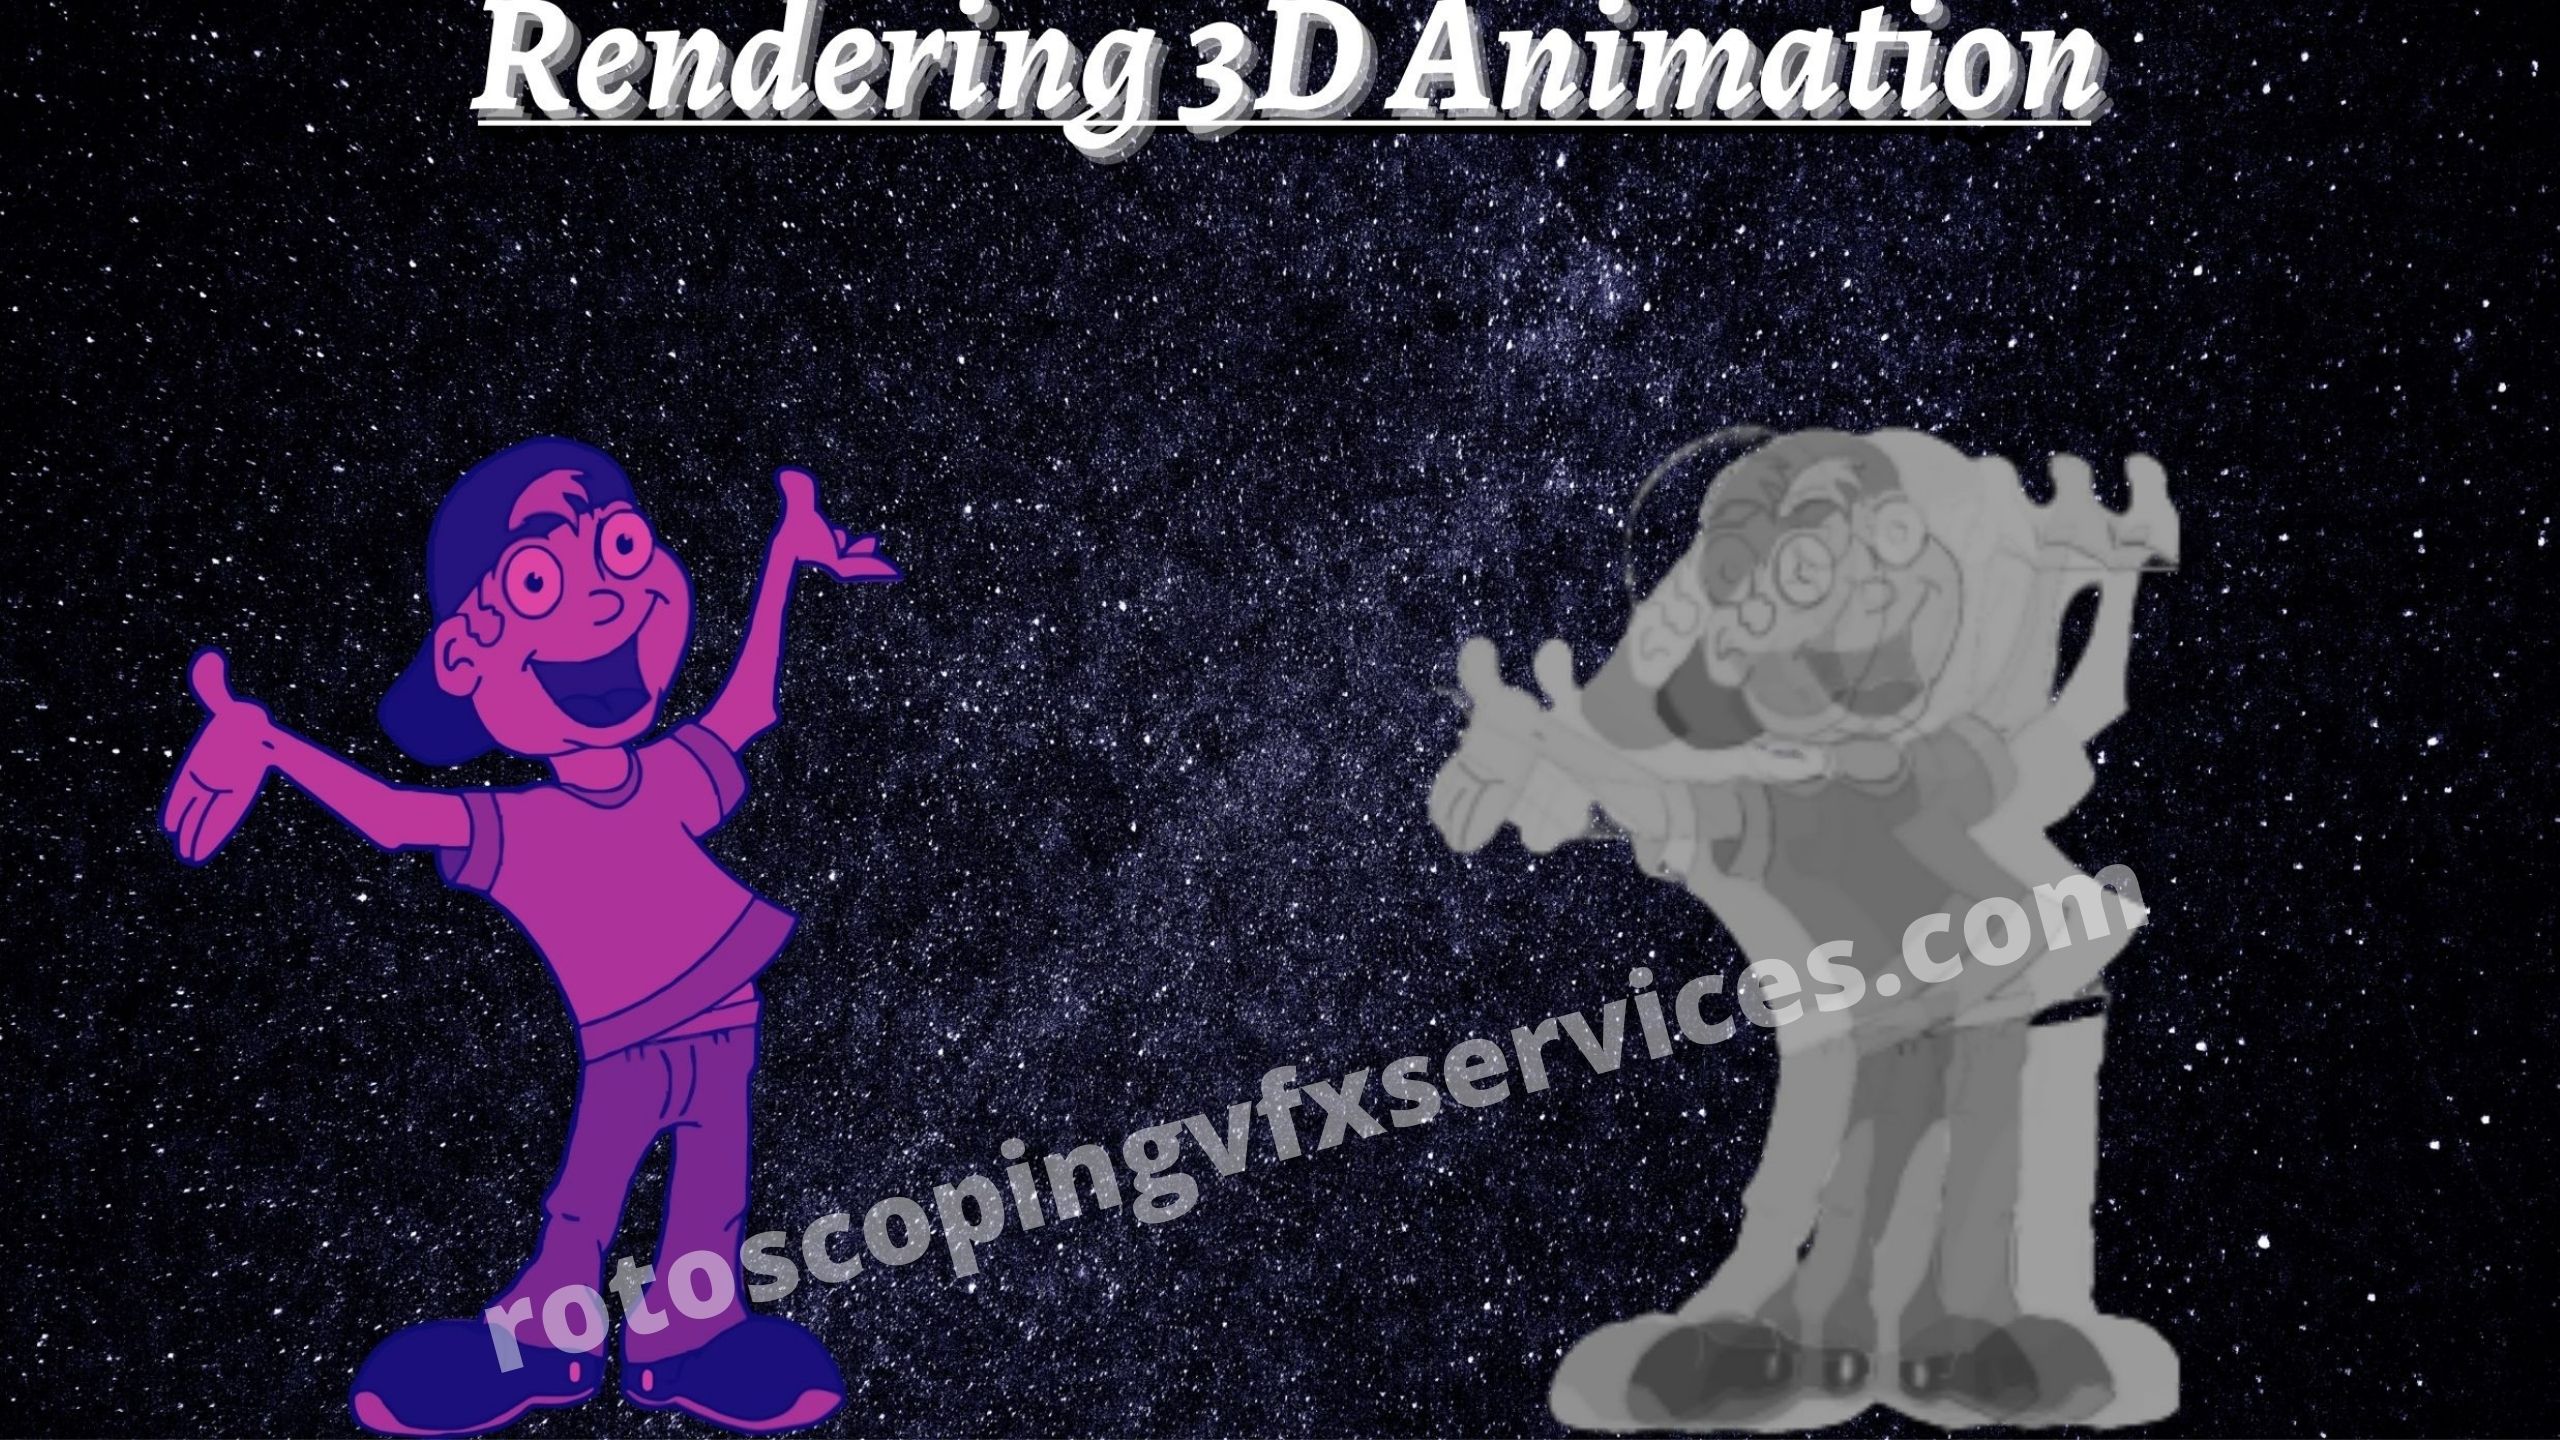 Rendering 3D Animation